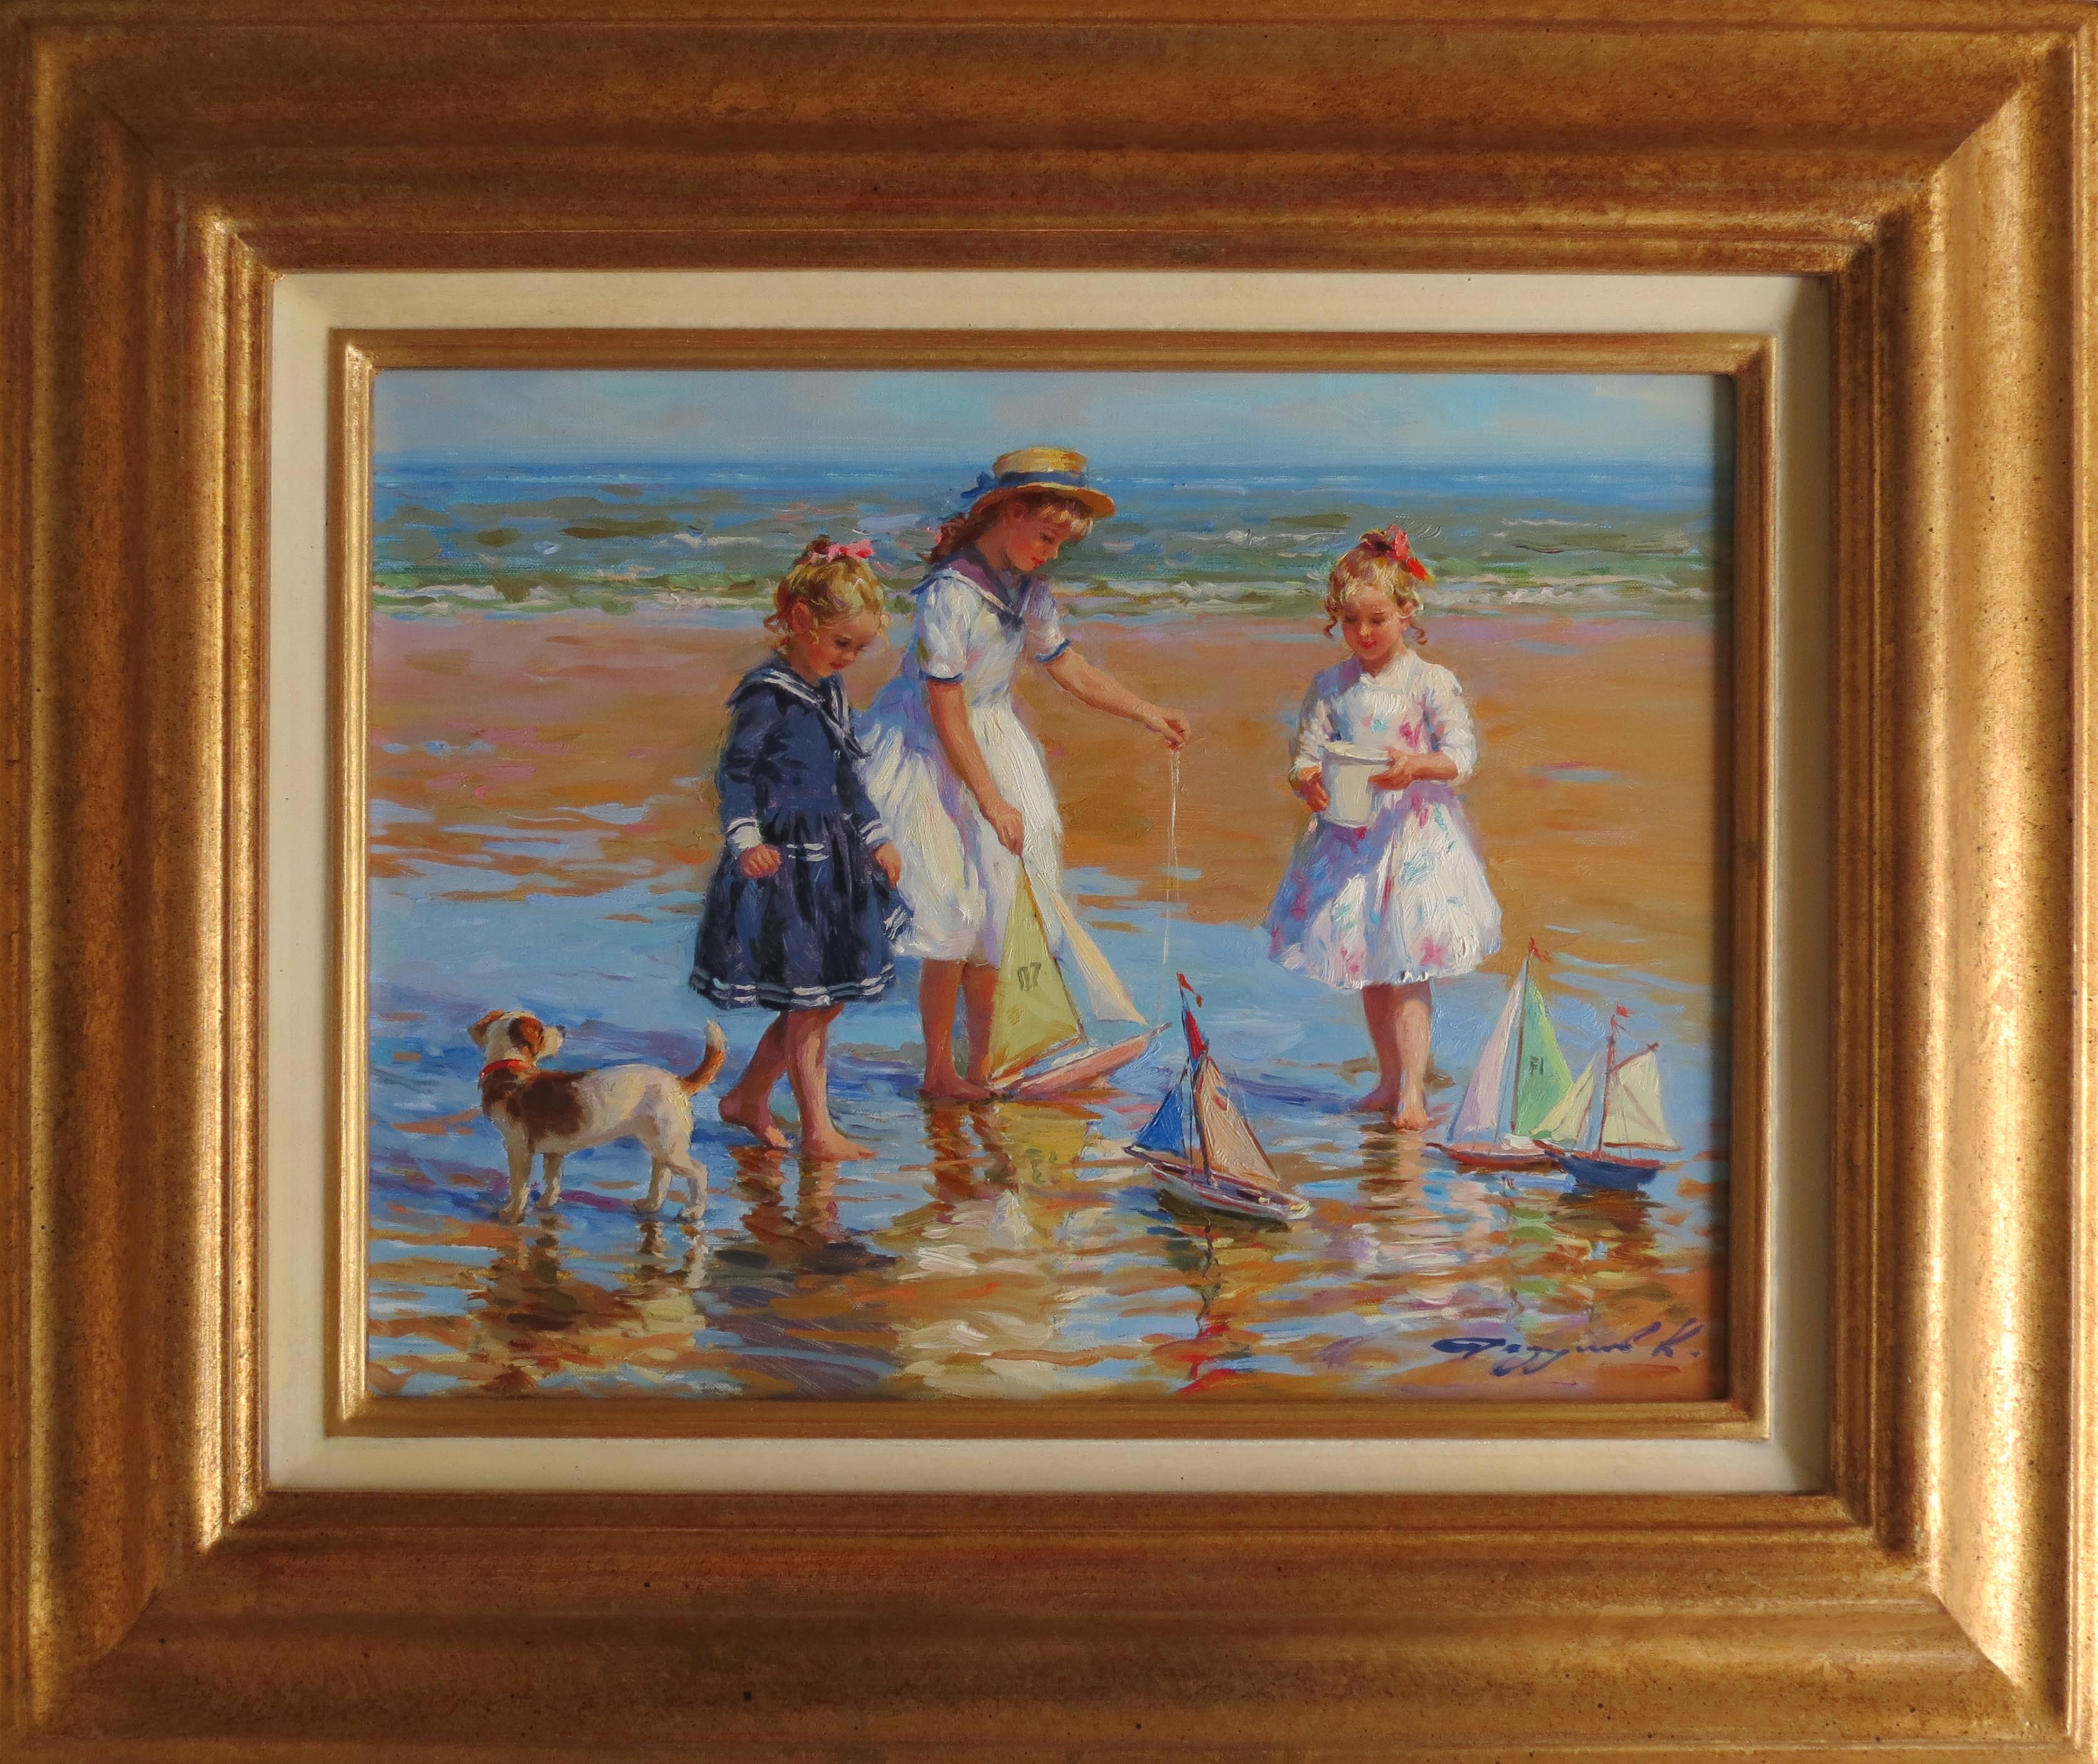 Konstantin Razumov (1974- ) Russian. "On the Seashore", Children and a Dog playing on the Beach with - Image 2 of 4